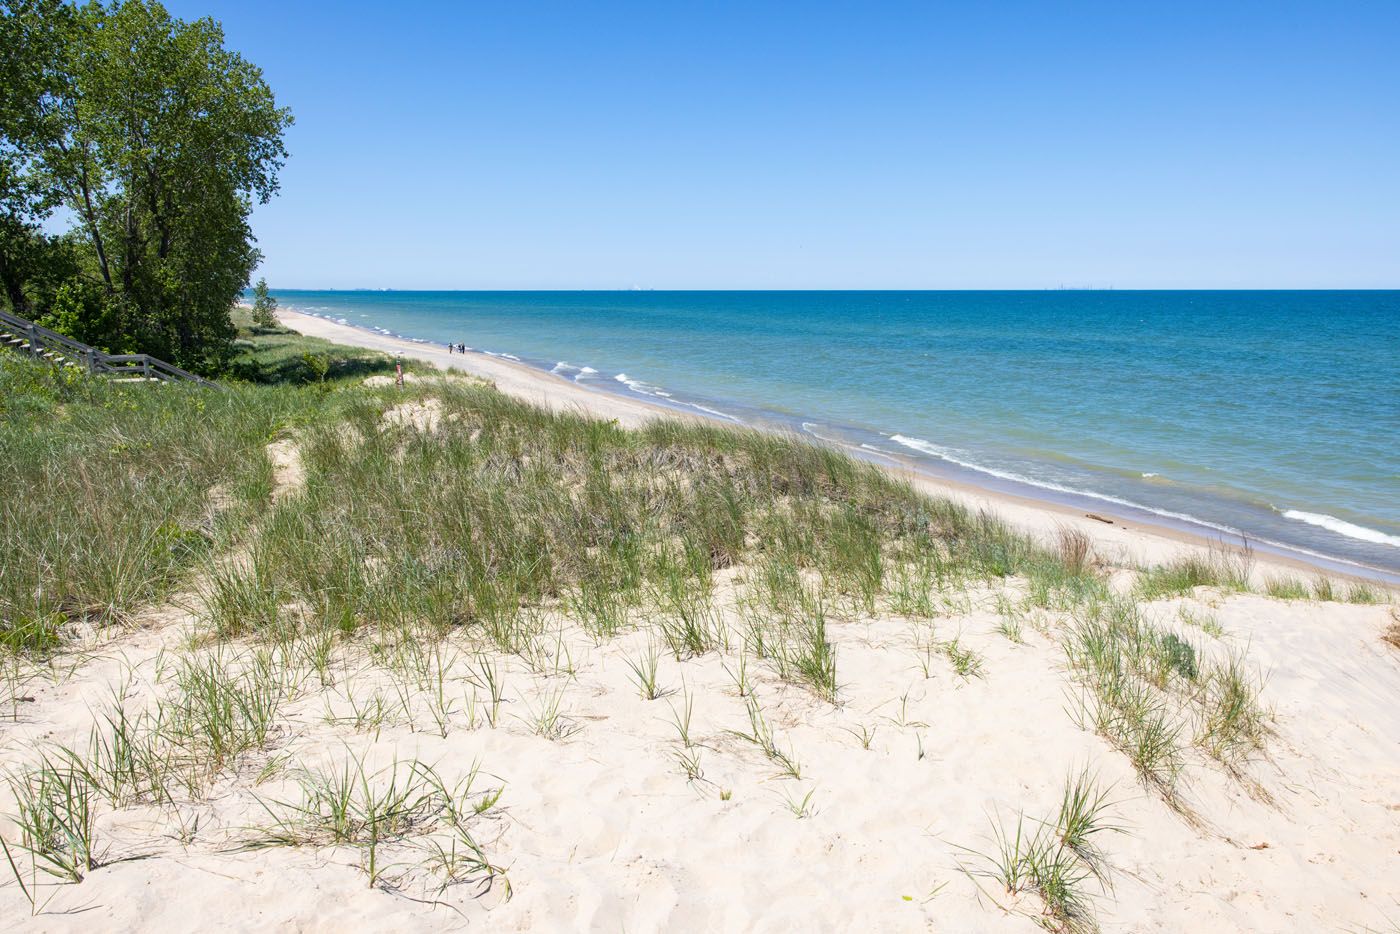 Dunbar Beach Indiana Dunes | Best Things to Do in Indiana Dunes